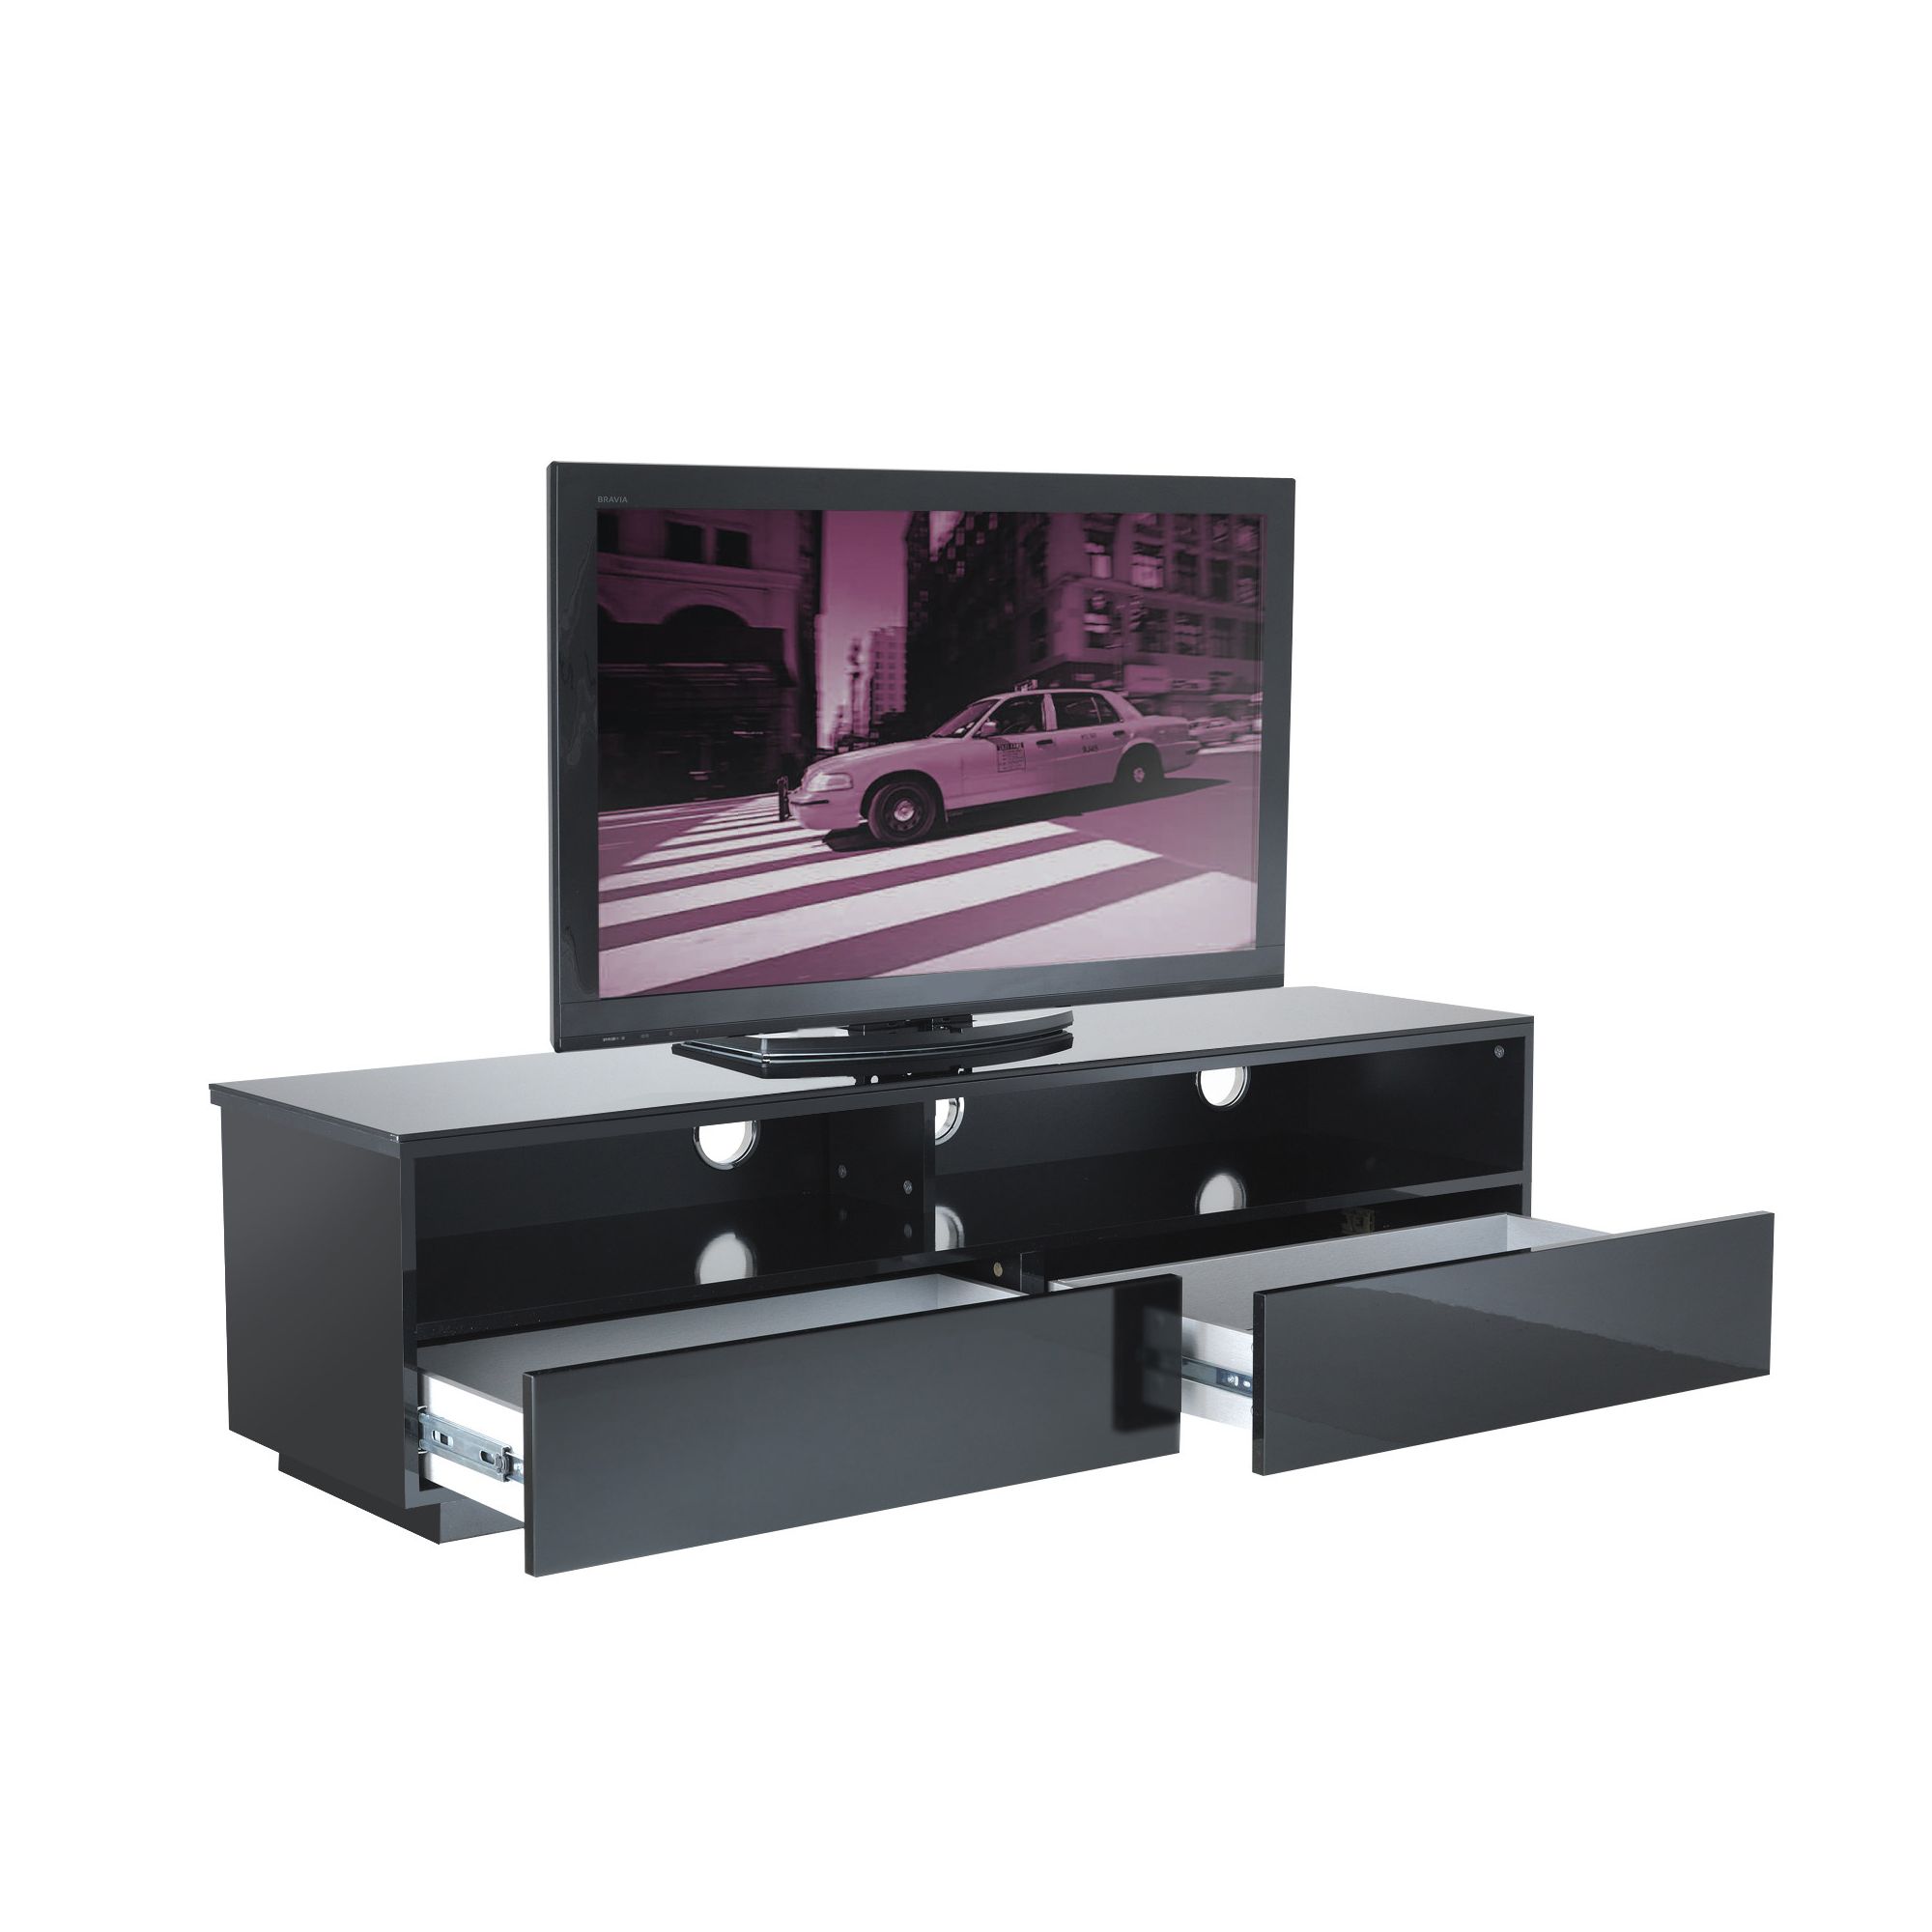 UK-CF Cityscape New York TV Stand - Black at Tescos Direct